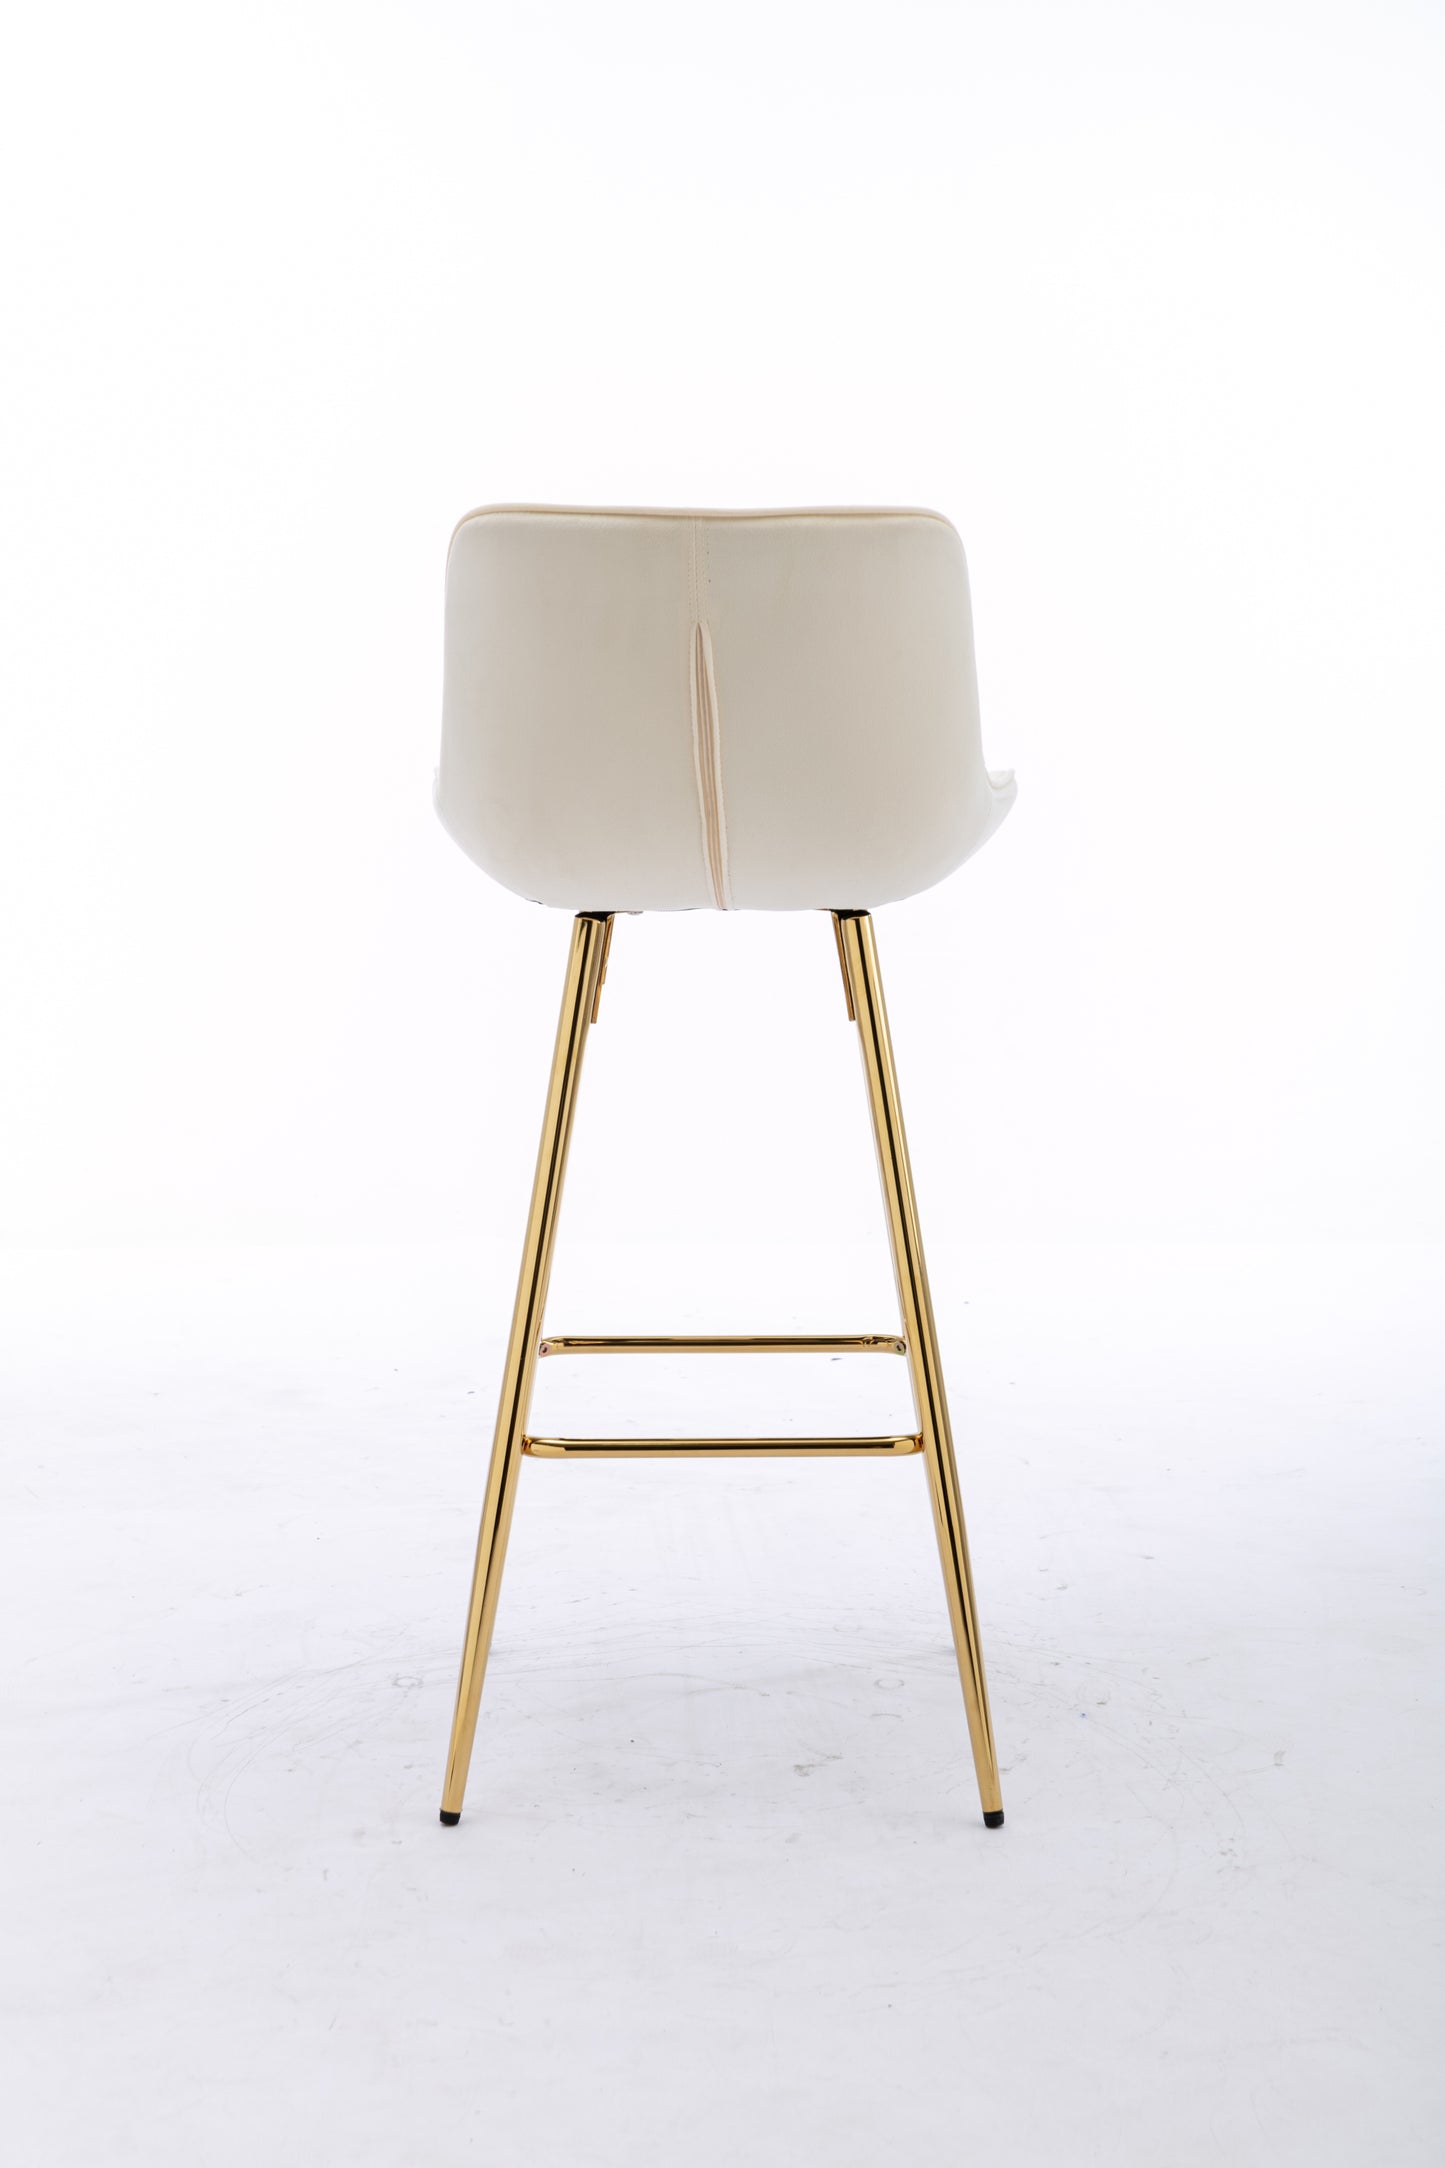 30 inch Set of 2 Bar Stools,with Chrome Footrest Velvet Fabric Counter Stool Golden Leg Simple High Bar Stool,CREAM - Enova Luxe Home Store